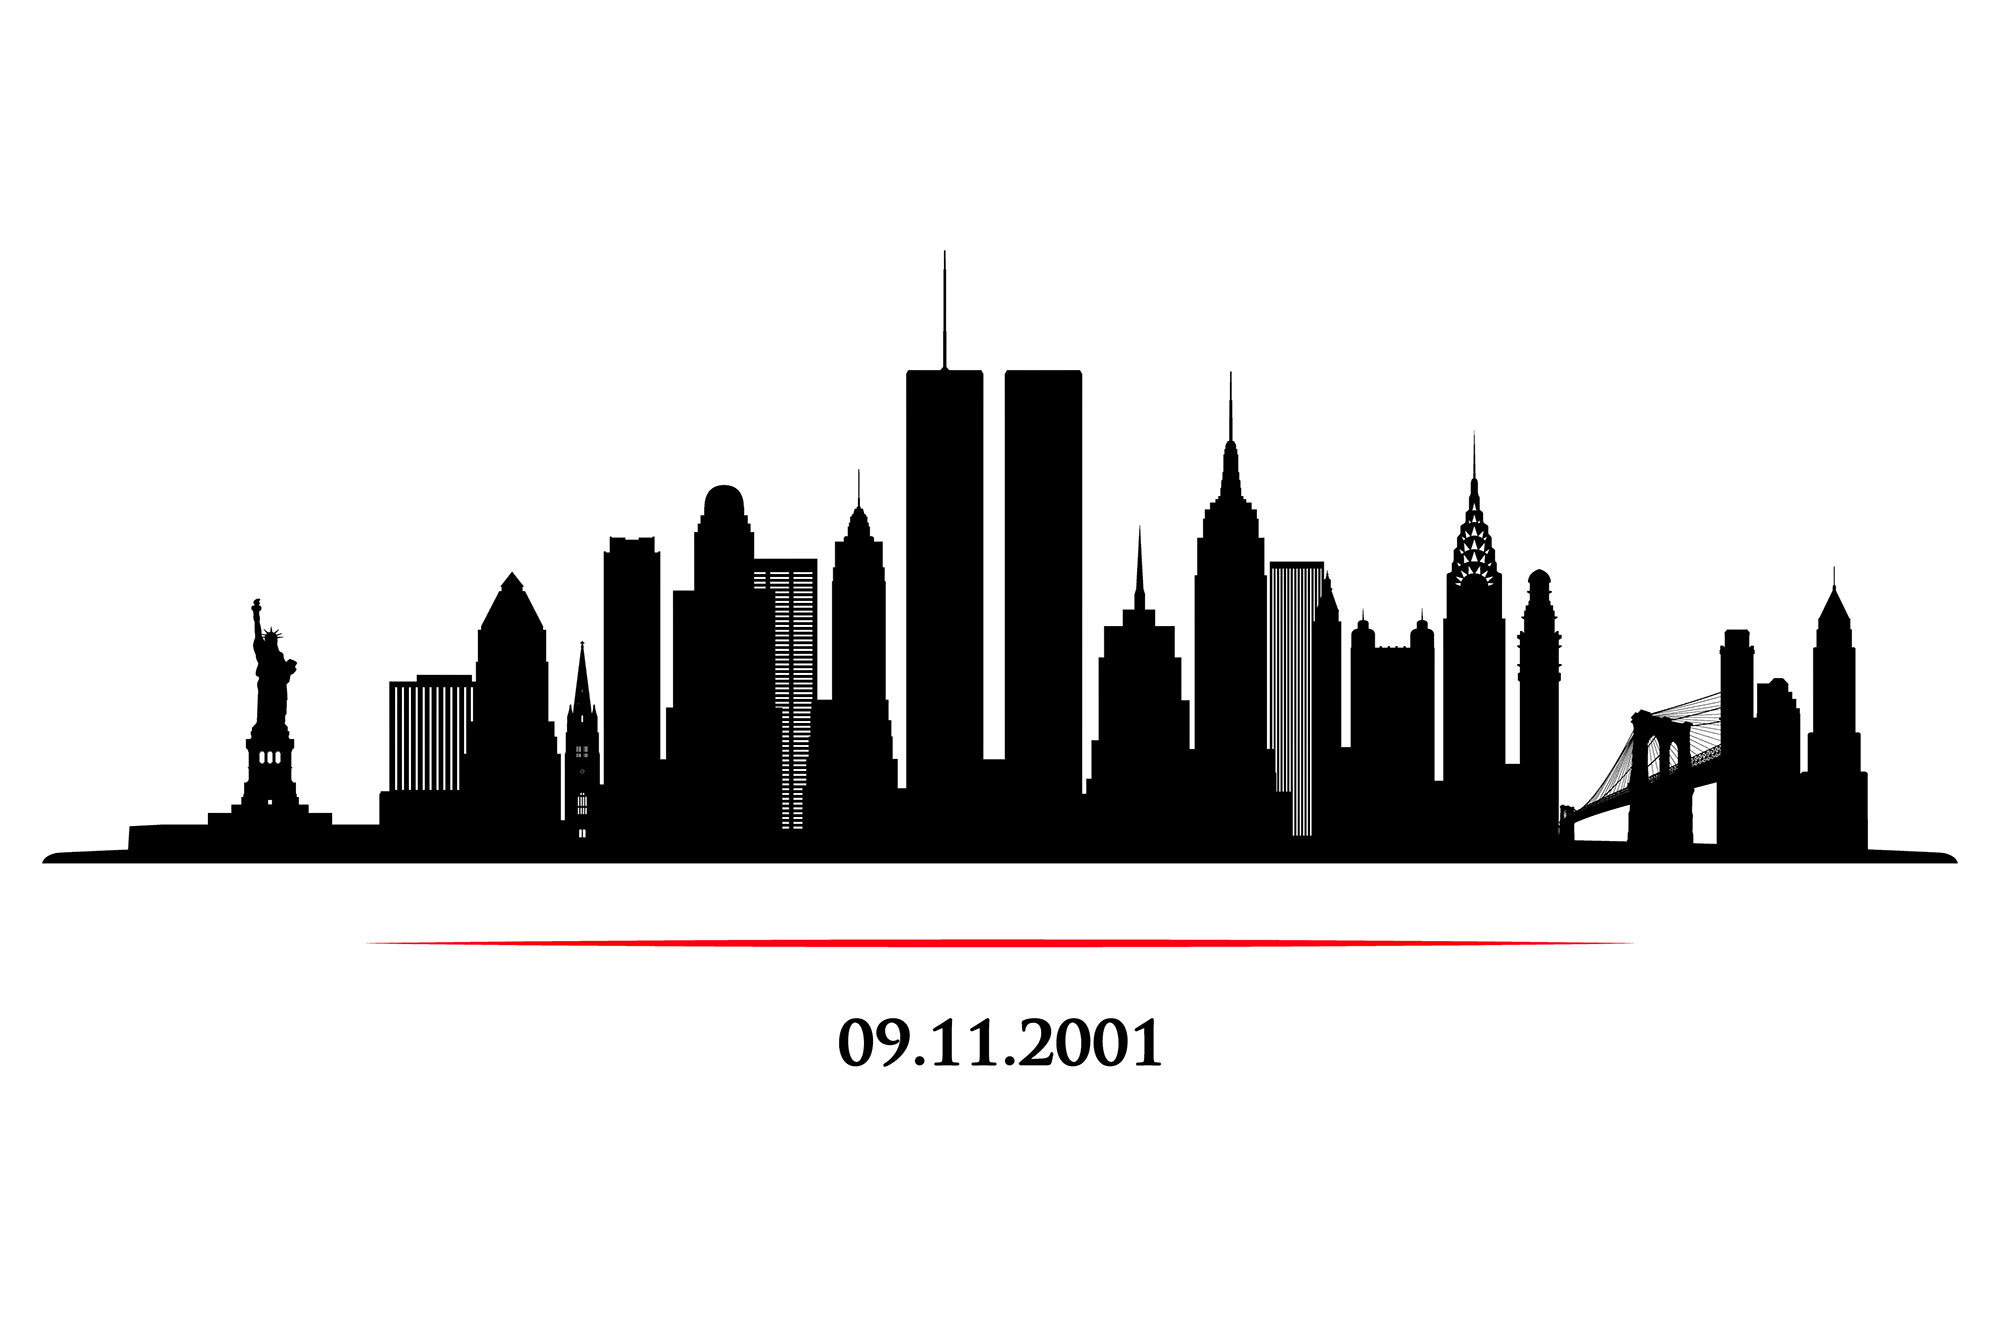 New York City Skyline with twins tower. World Trade Center. 09.11.2001 American Patriot Day anniversary banner. Vector illustration.